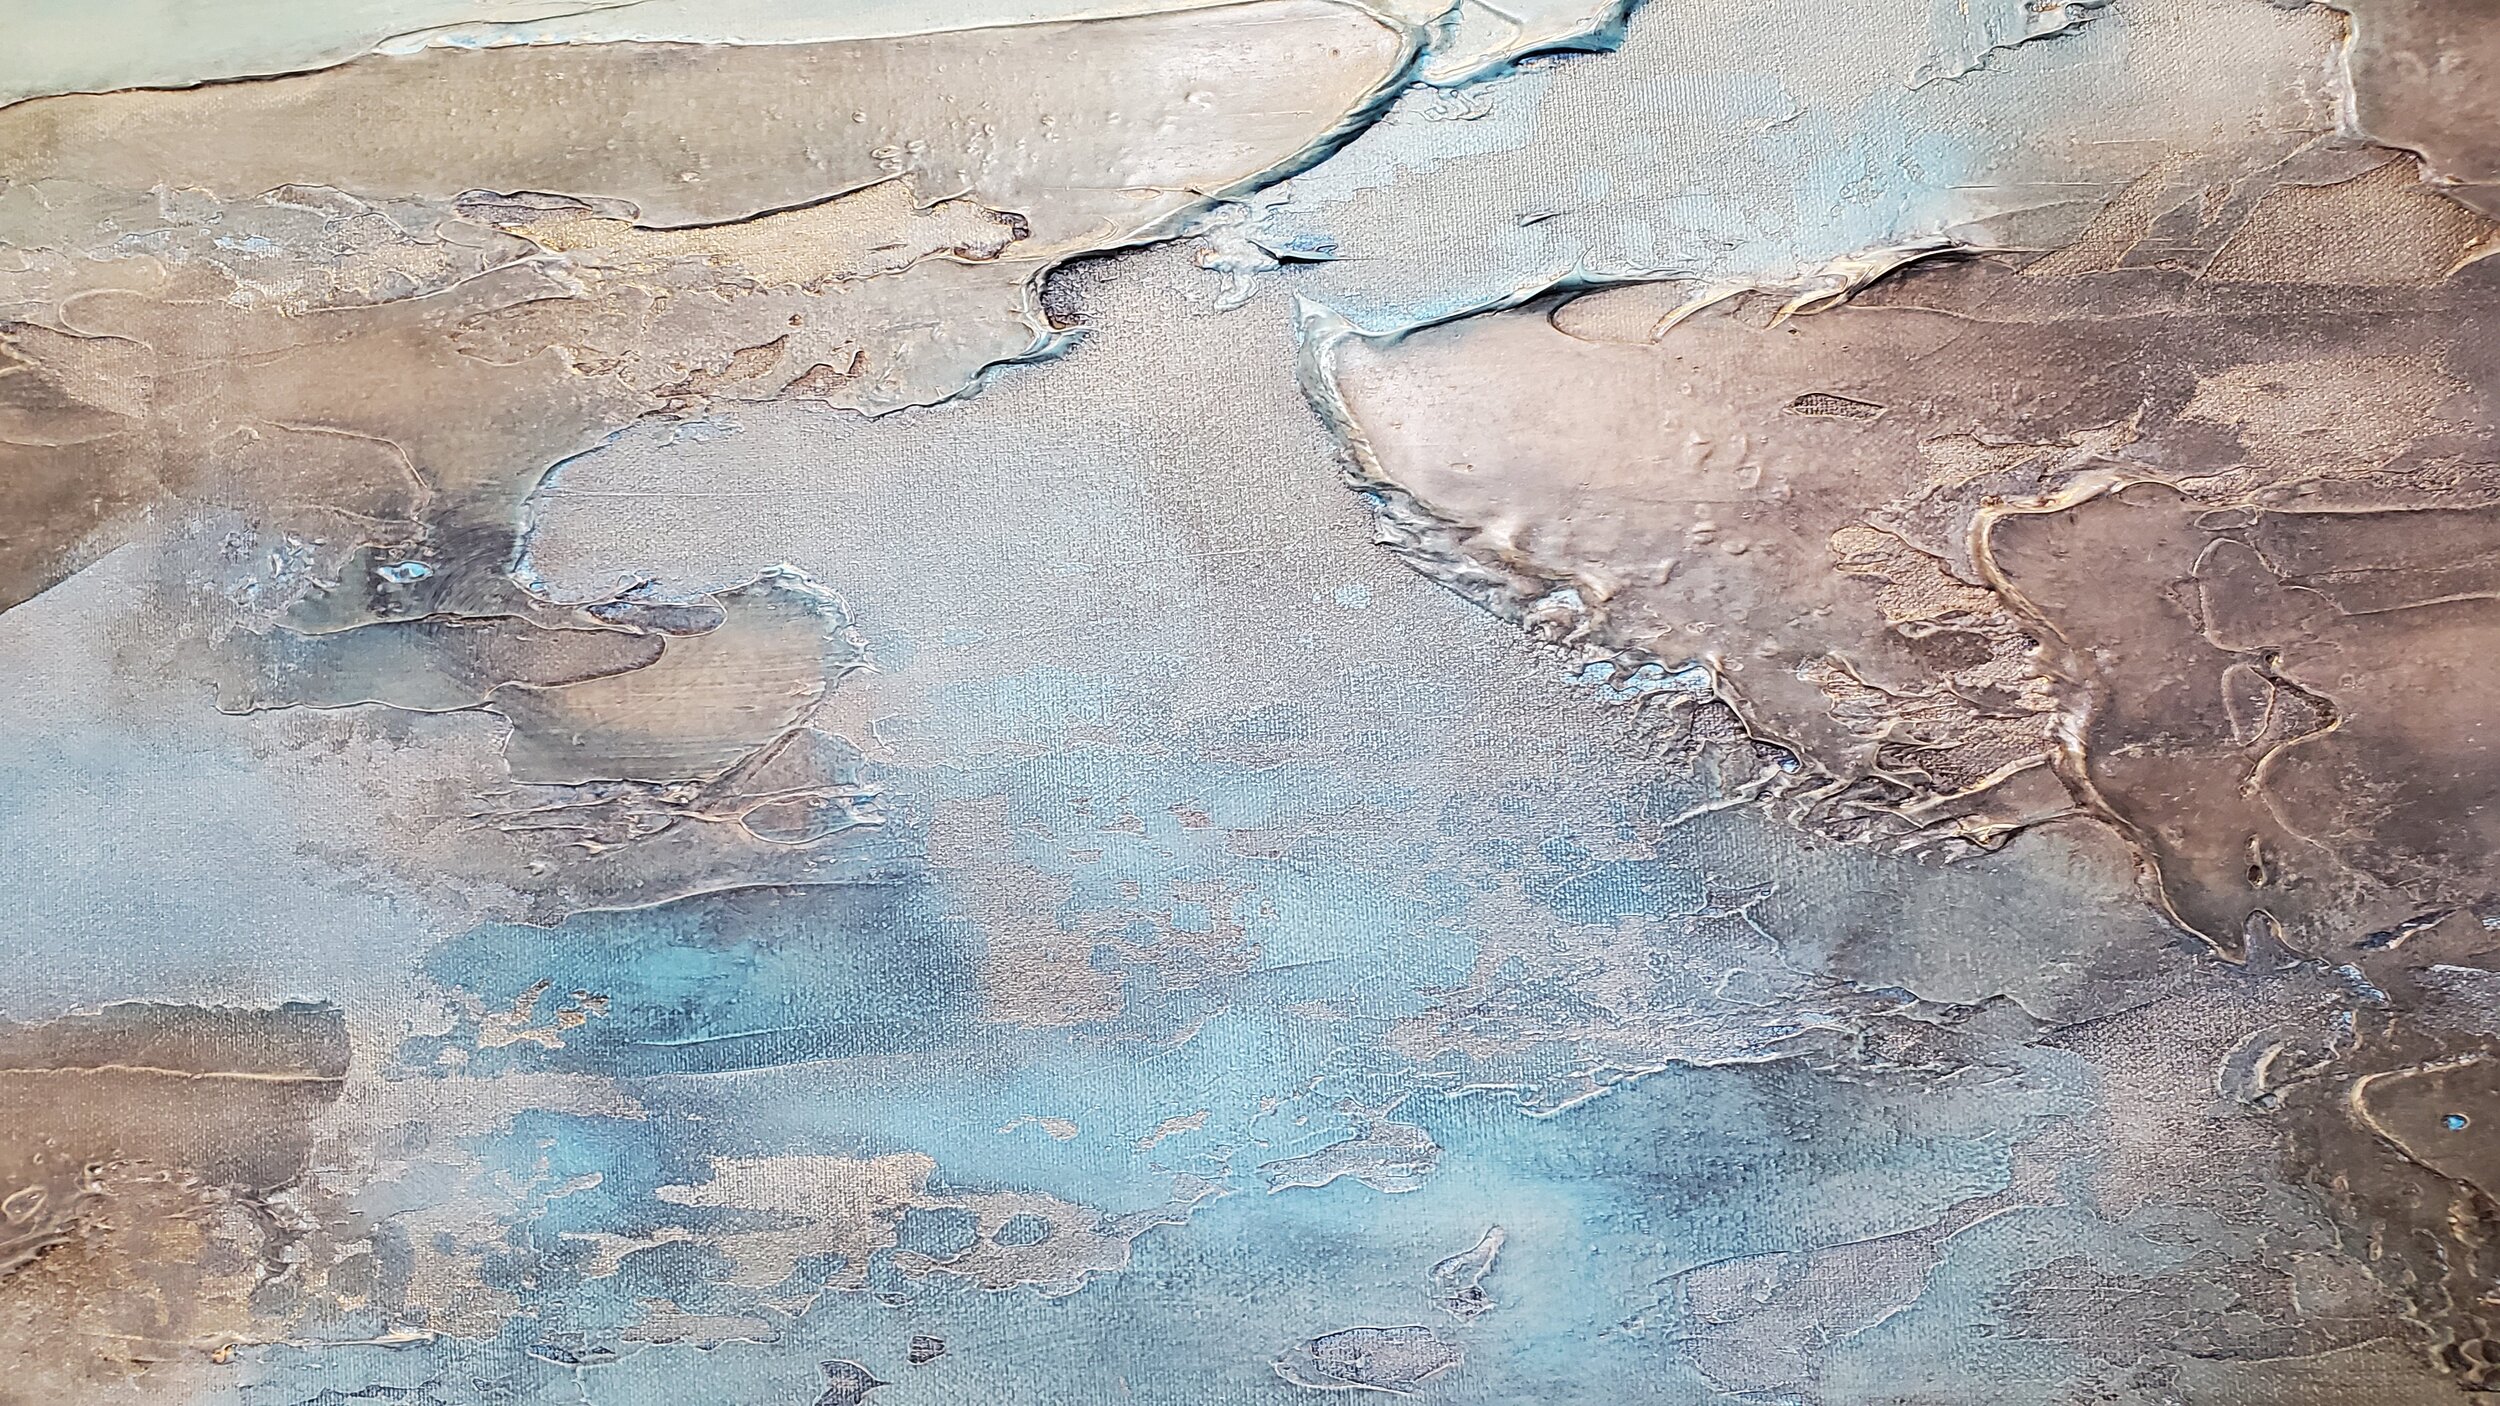  Painting #11  Found- Vancouver abstract painter, Donna Giraud has eleven new available artworks for sale in her 2020 solo art exhibition titled, Lost and Found. Her large scale, abstract, textural artworks are perfect for any interior design aesthet